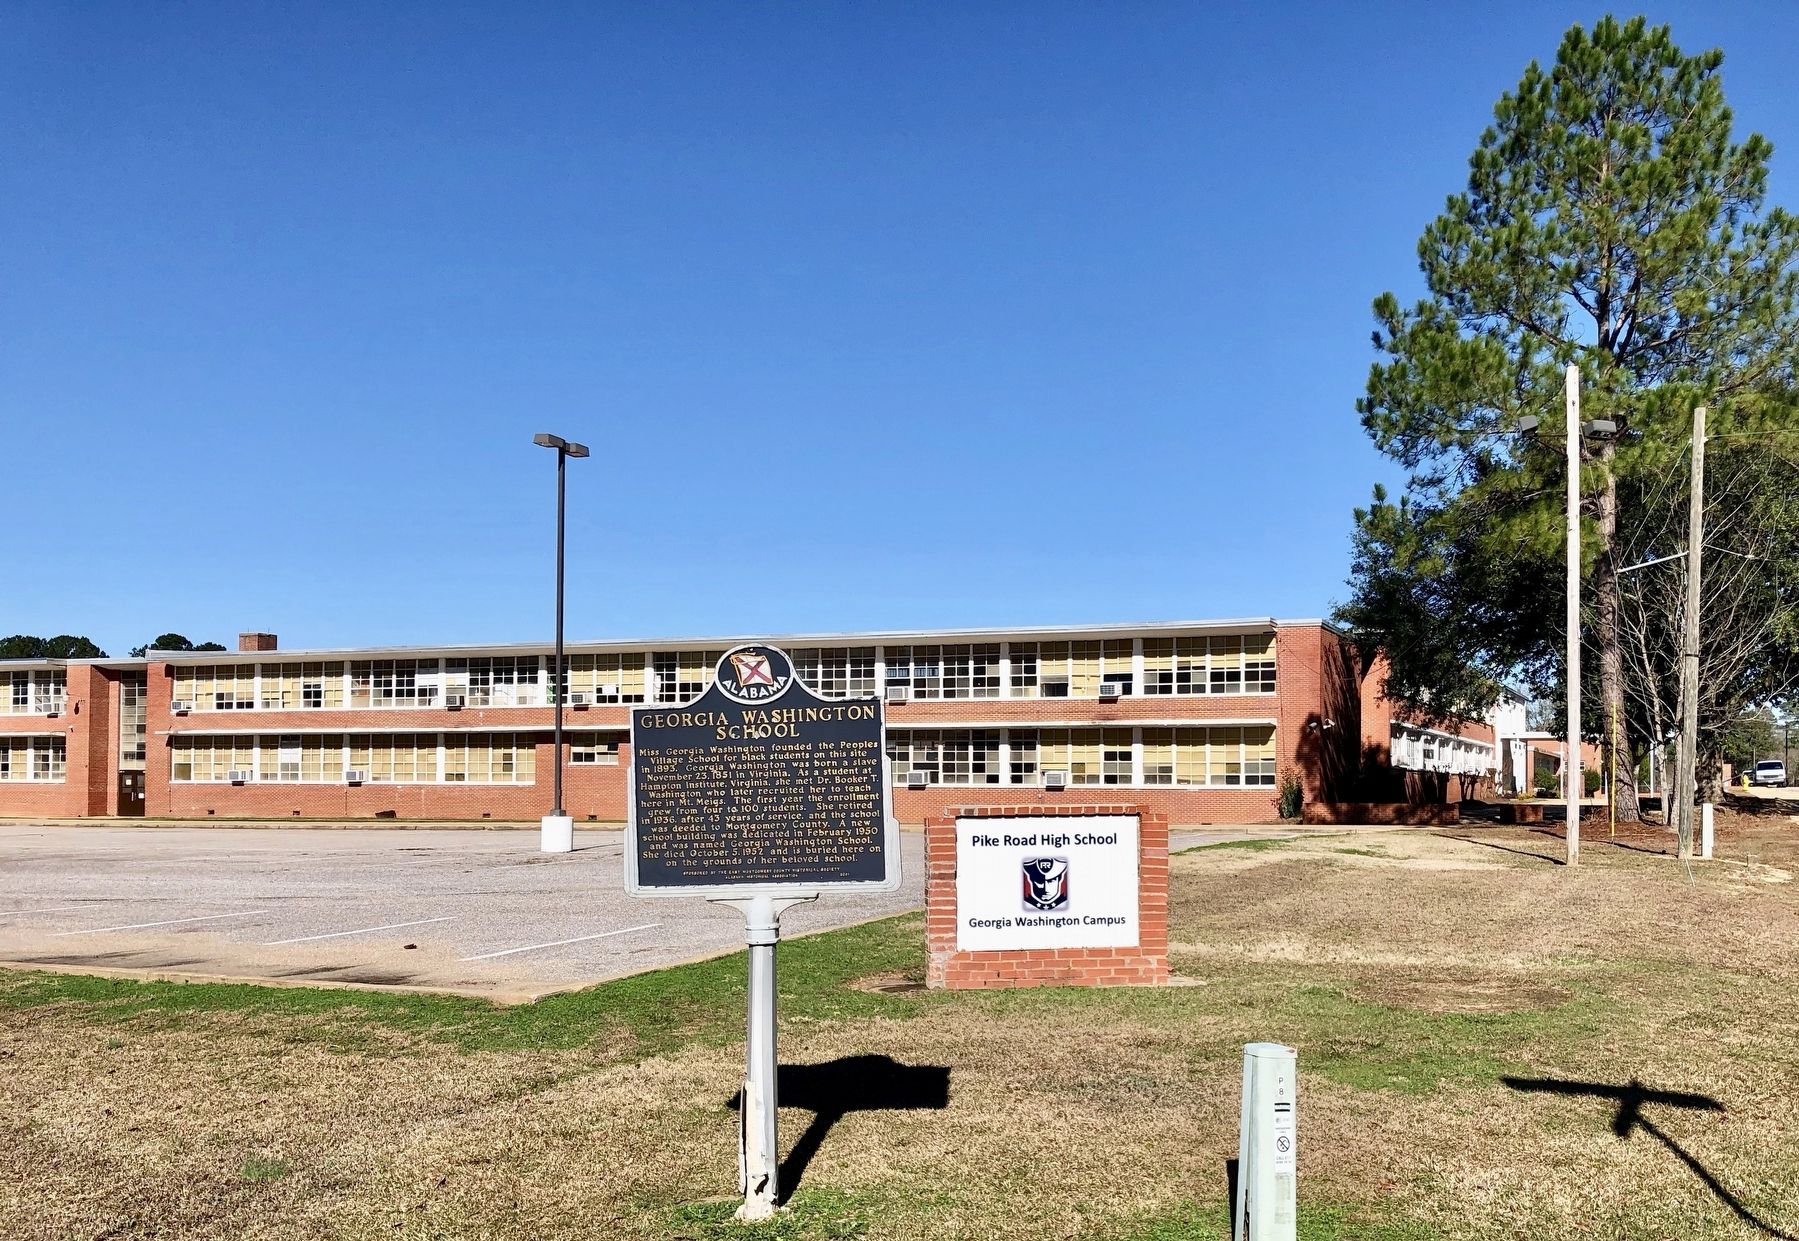 Now the Pike Road High School - Georgia Washington Campus. image. Click for full size.